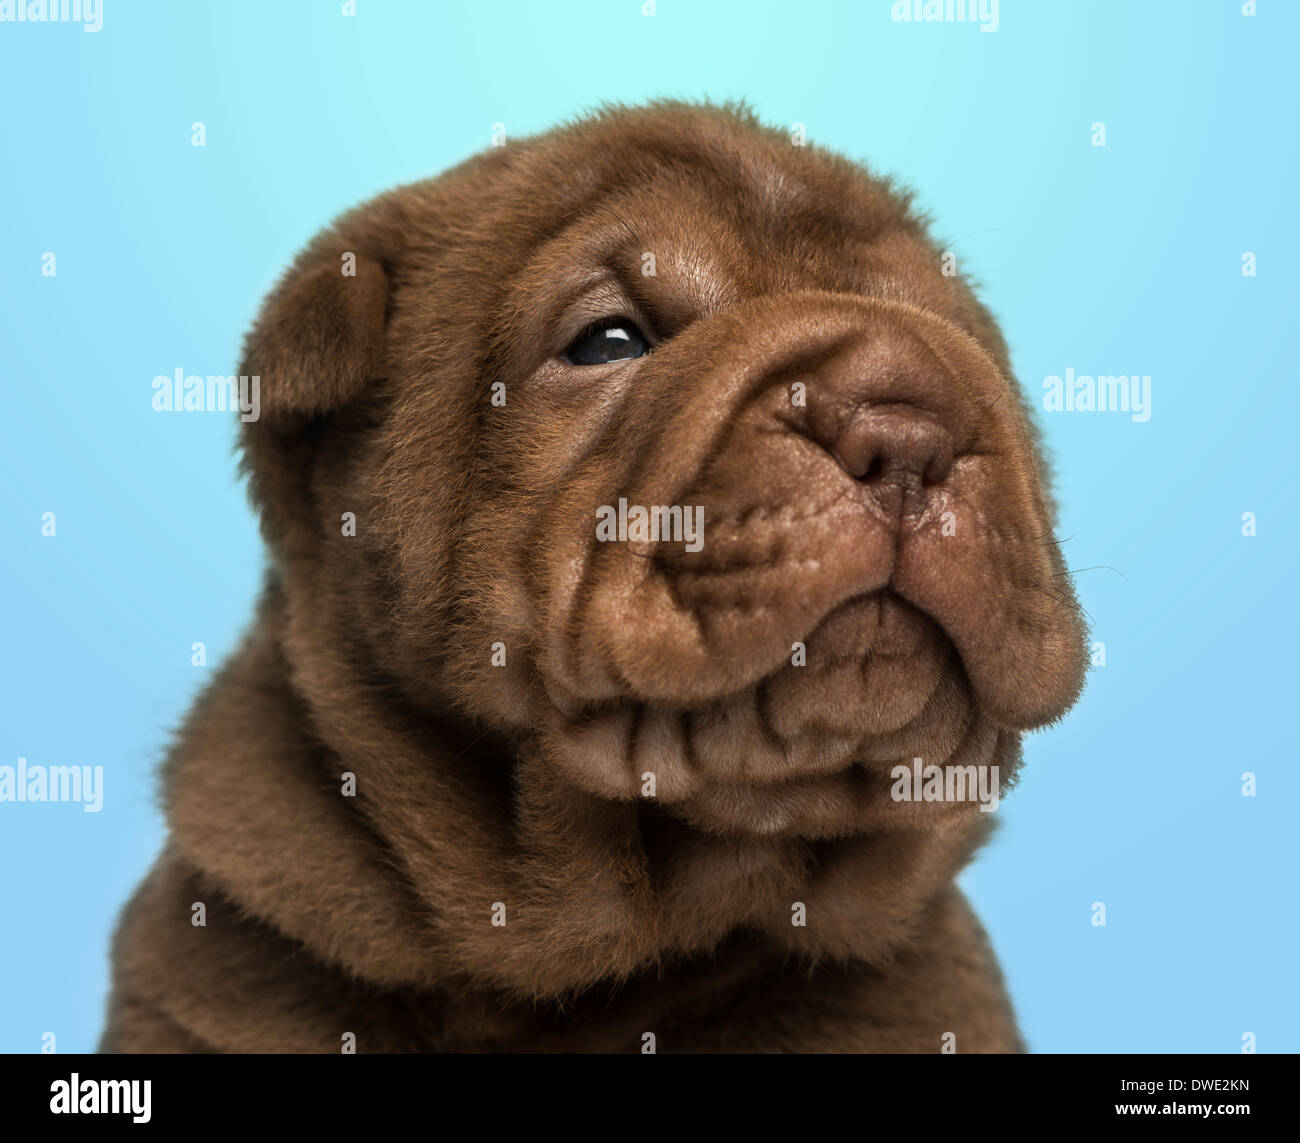 Close-up of a Shar Pei puppy on a blue background Stock Photo